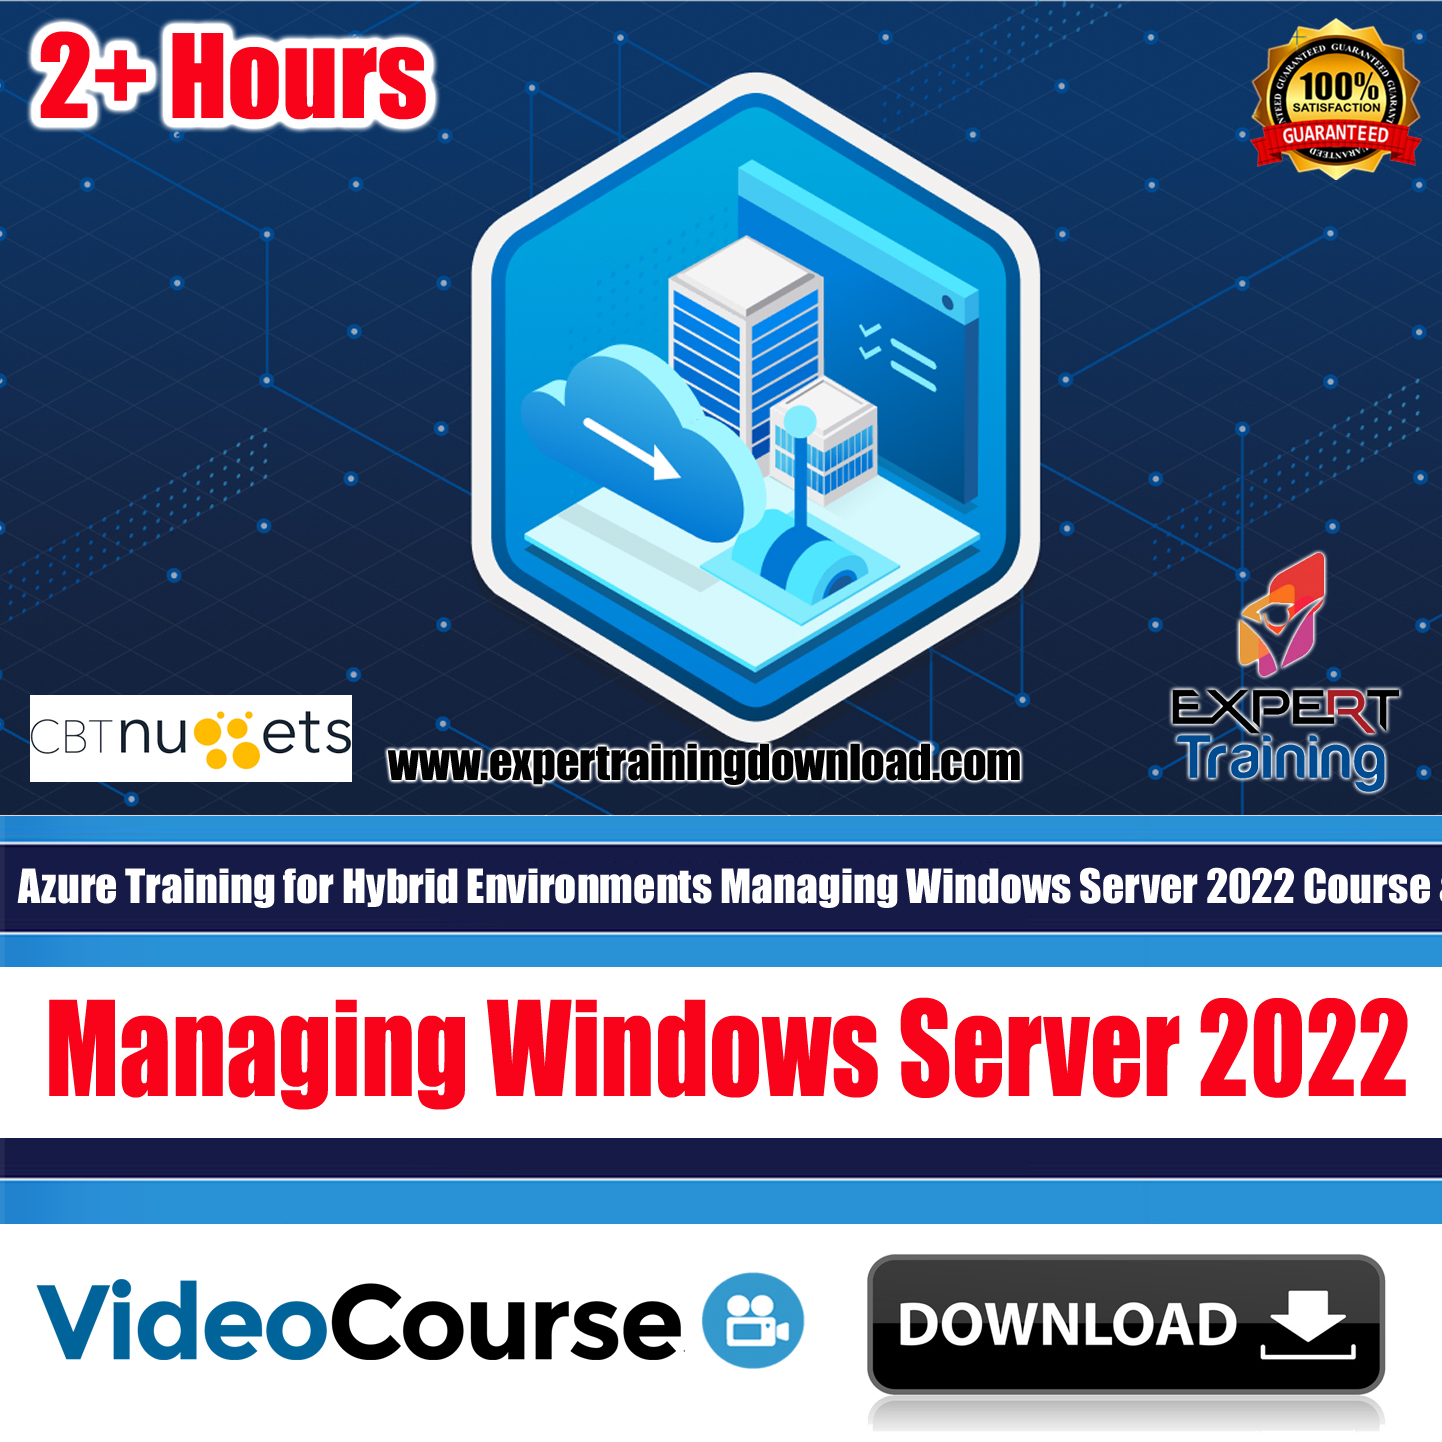 Azure Training for Hybrid Environments Managing Windows Server 2022 Course & PDF Guides